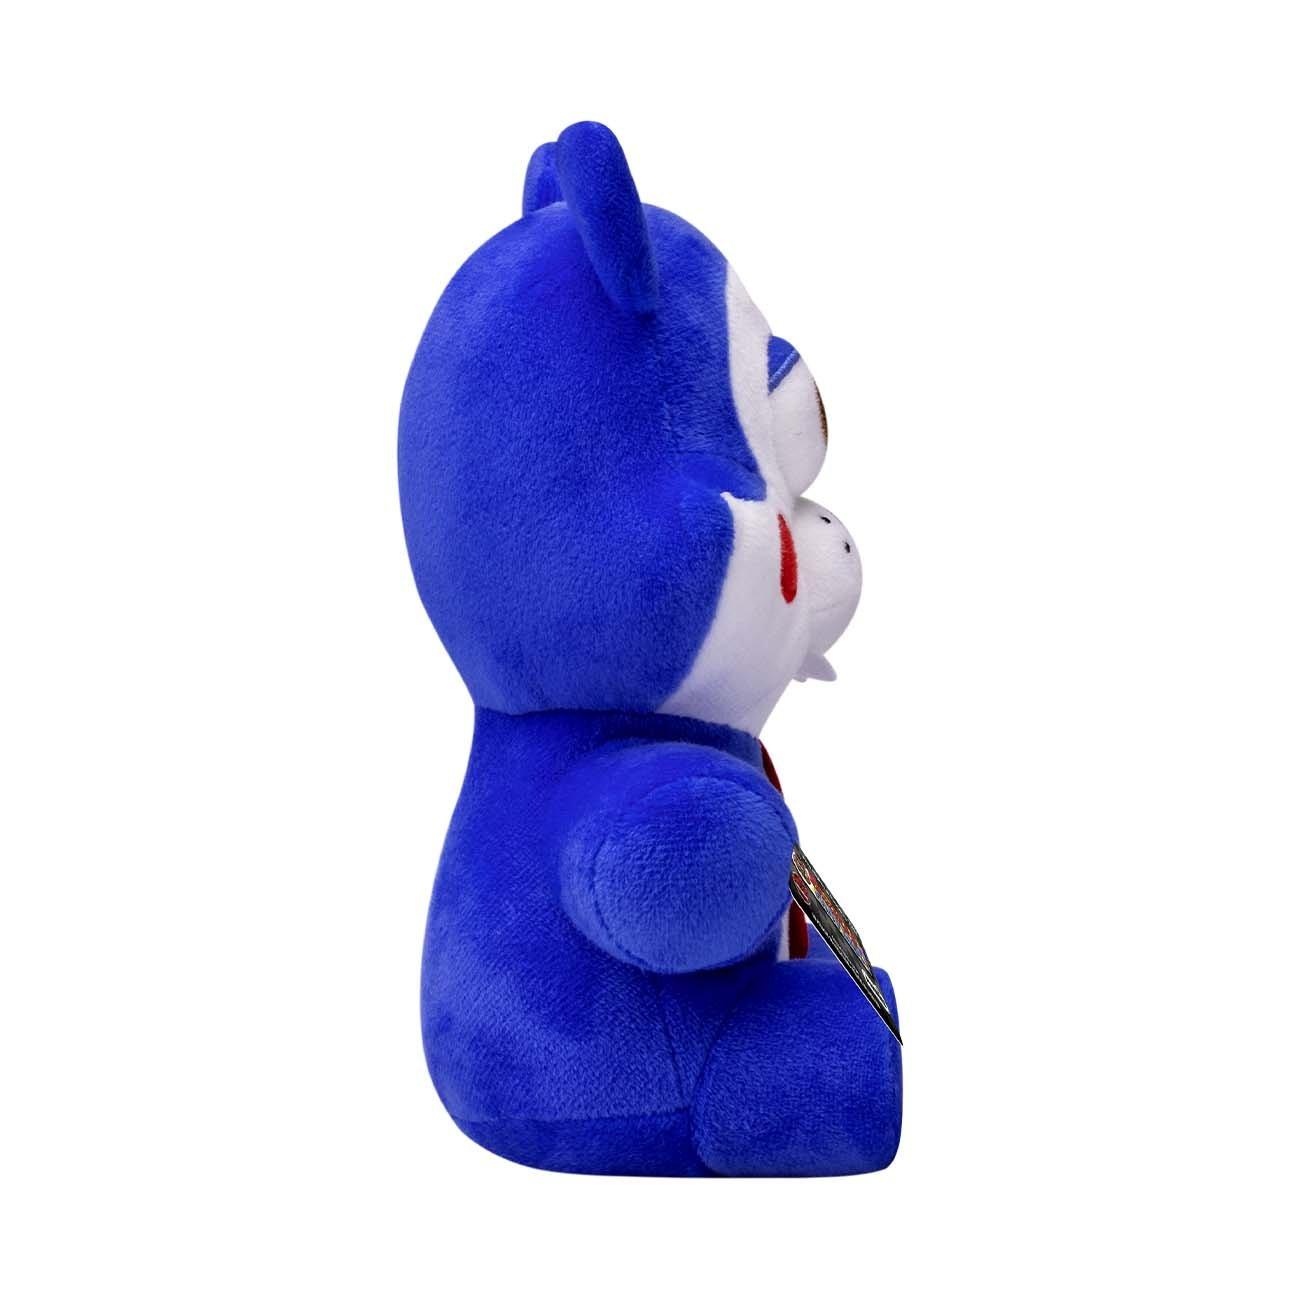 list item 3 of 3 Funko Plush Five Nights at Freddy's Fanverse Candy the Cat GameStop Exclusive